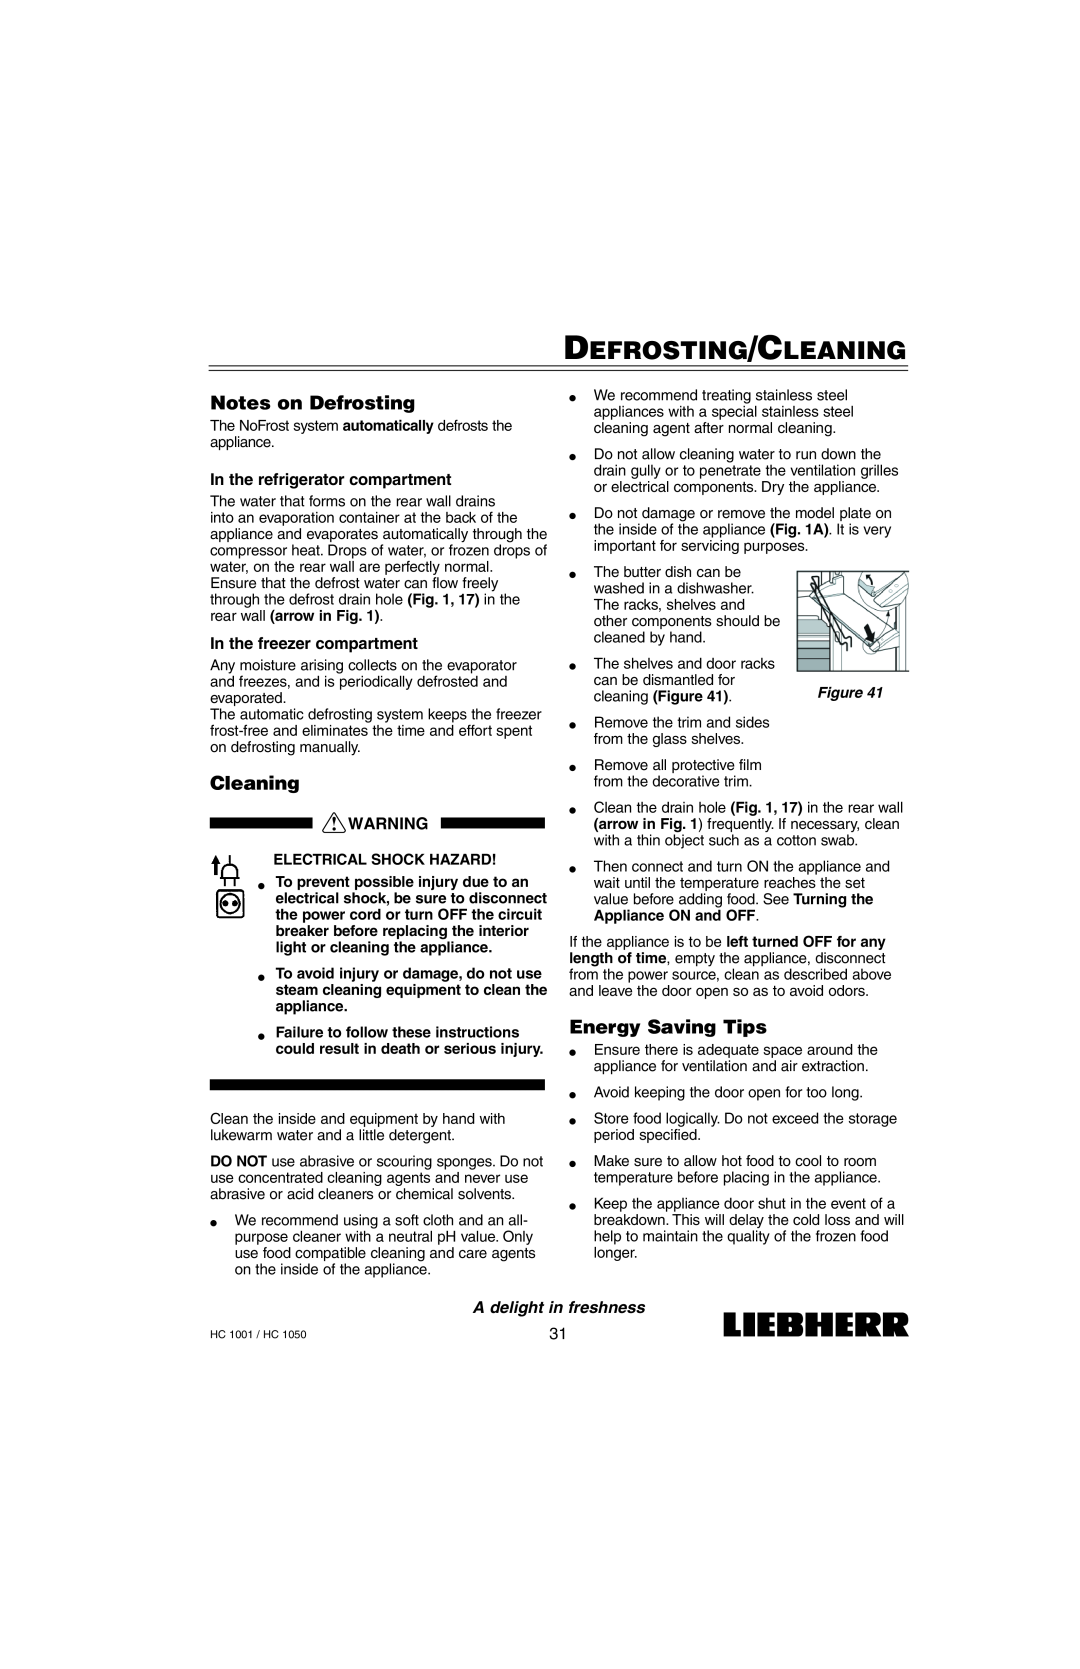 Liebherr HC1050, HC1001 Defrosting/Cleaning, Notes on Defrosting, Energy Saving Tips, In the refrigerator compartment 